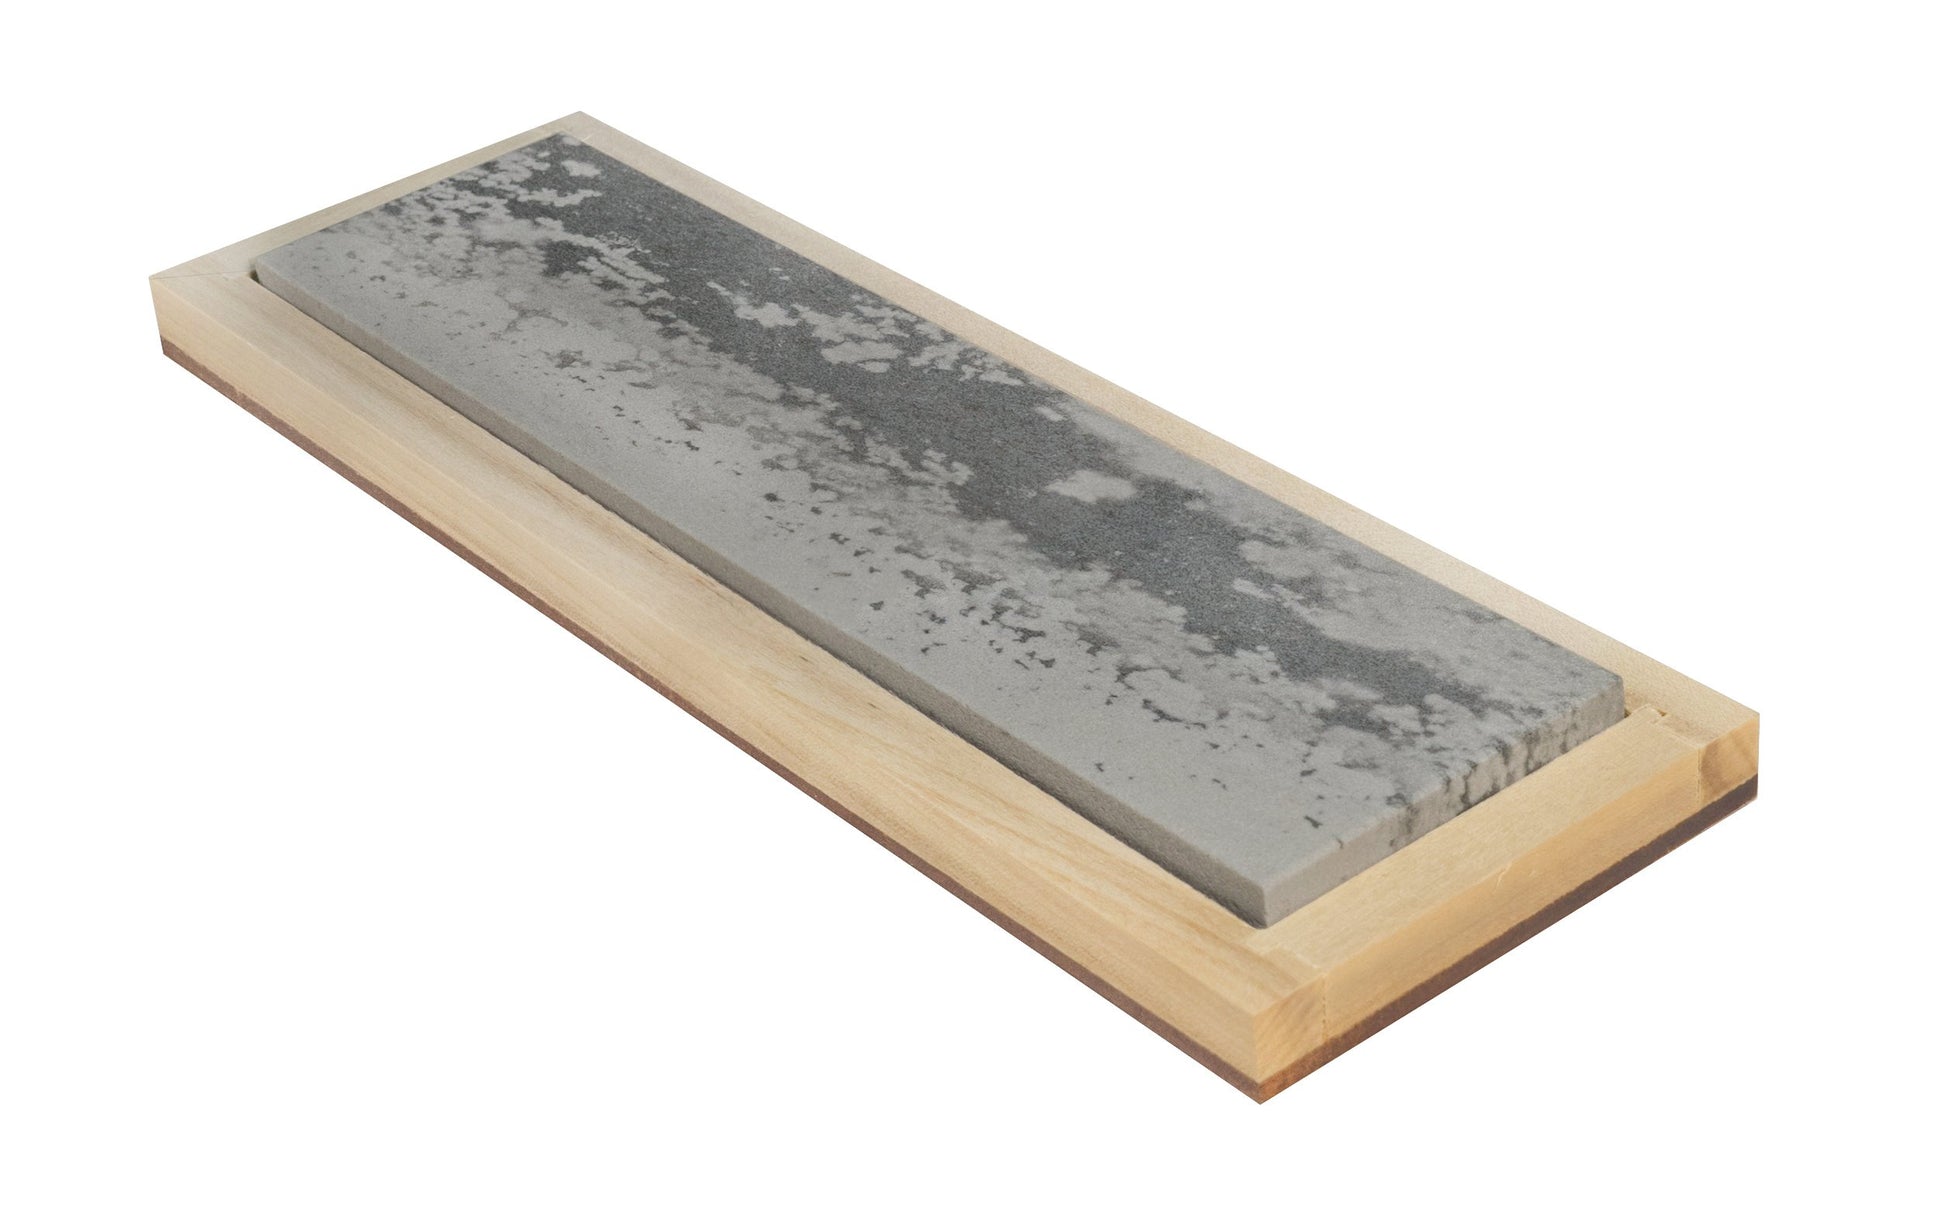 Soft Arkansas Bench Stone with Wooden Box ~ 8" x 2" - Made in USA ~ Good extra-fine stone. It is the least dense & coarsest grained of the natural Arkansas stones & good for starting an edge on your tools & knives; commonly used after synthetic or oil stone ~ Model No. MAB-82-C